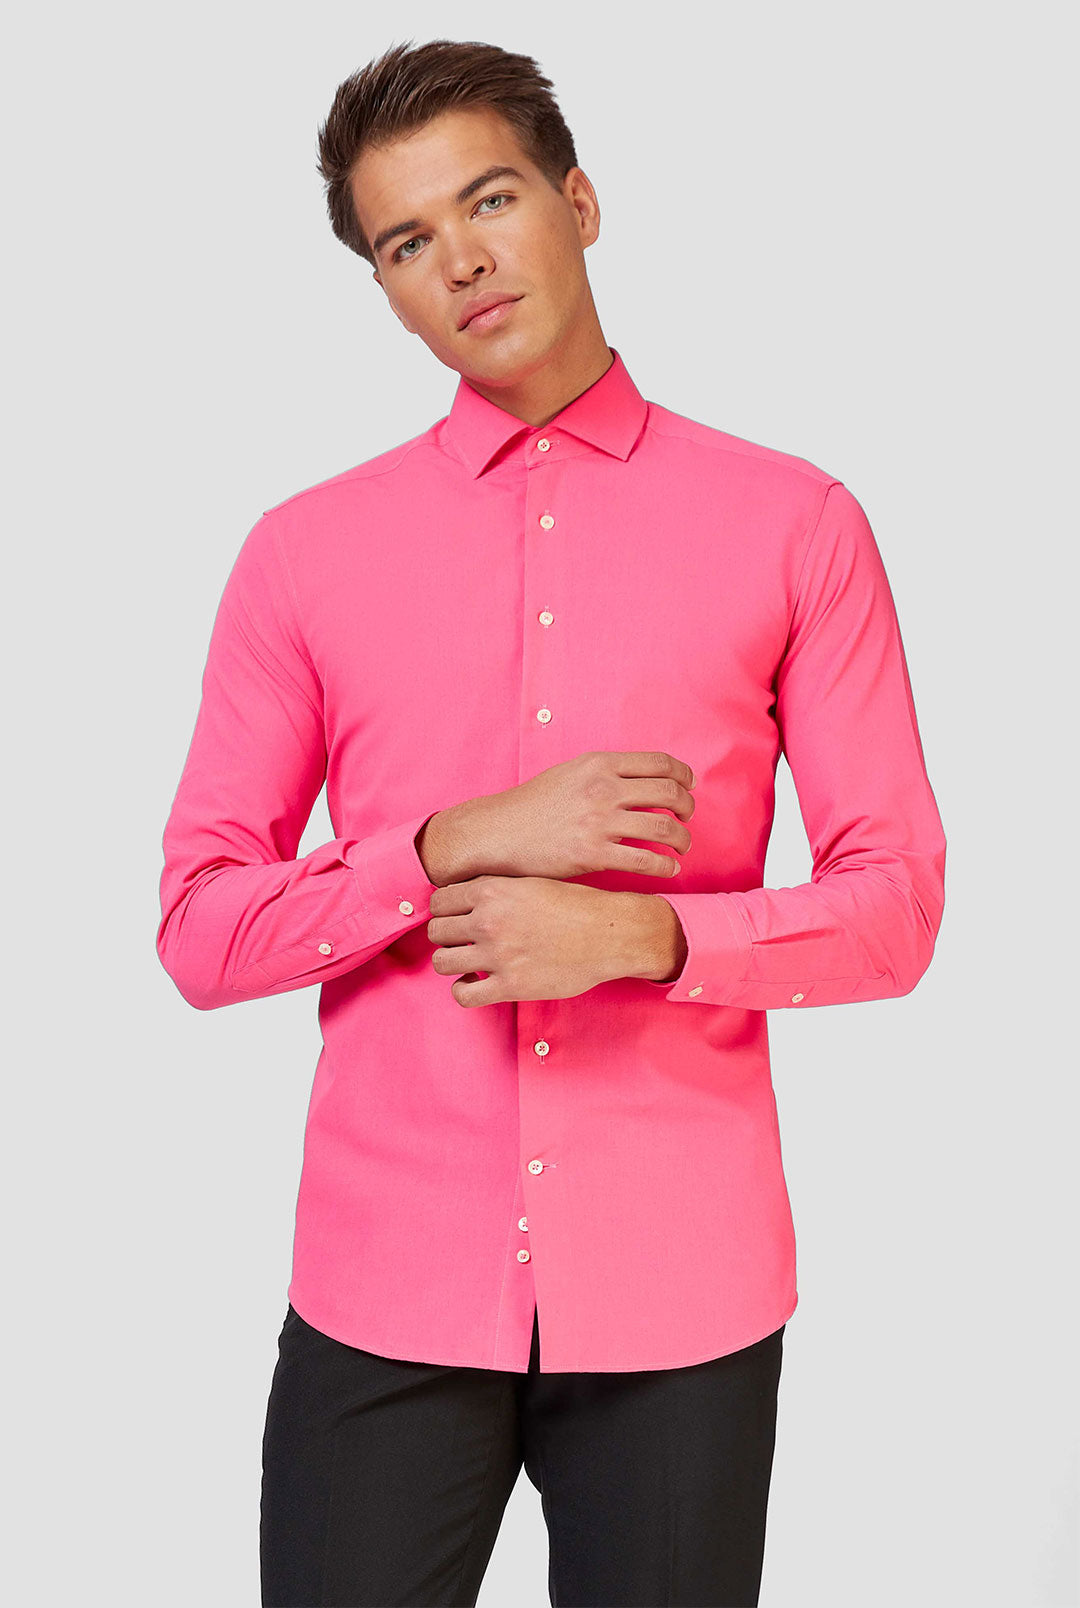 Real Men Wear Pink: Why Rose Is the Color This Summer 2022 - The Manual